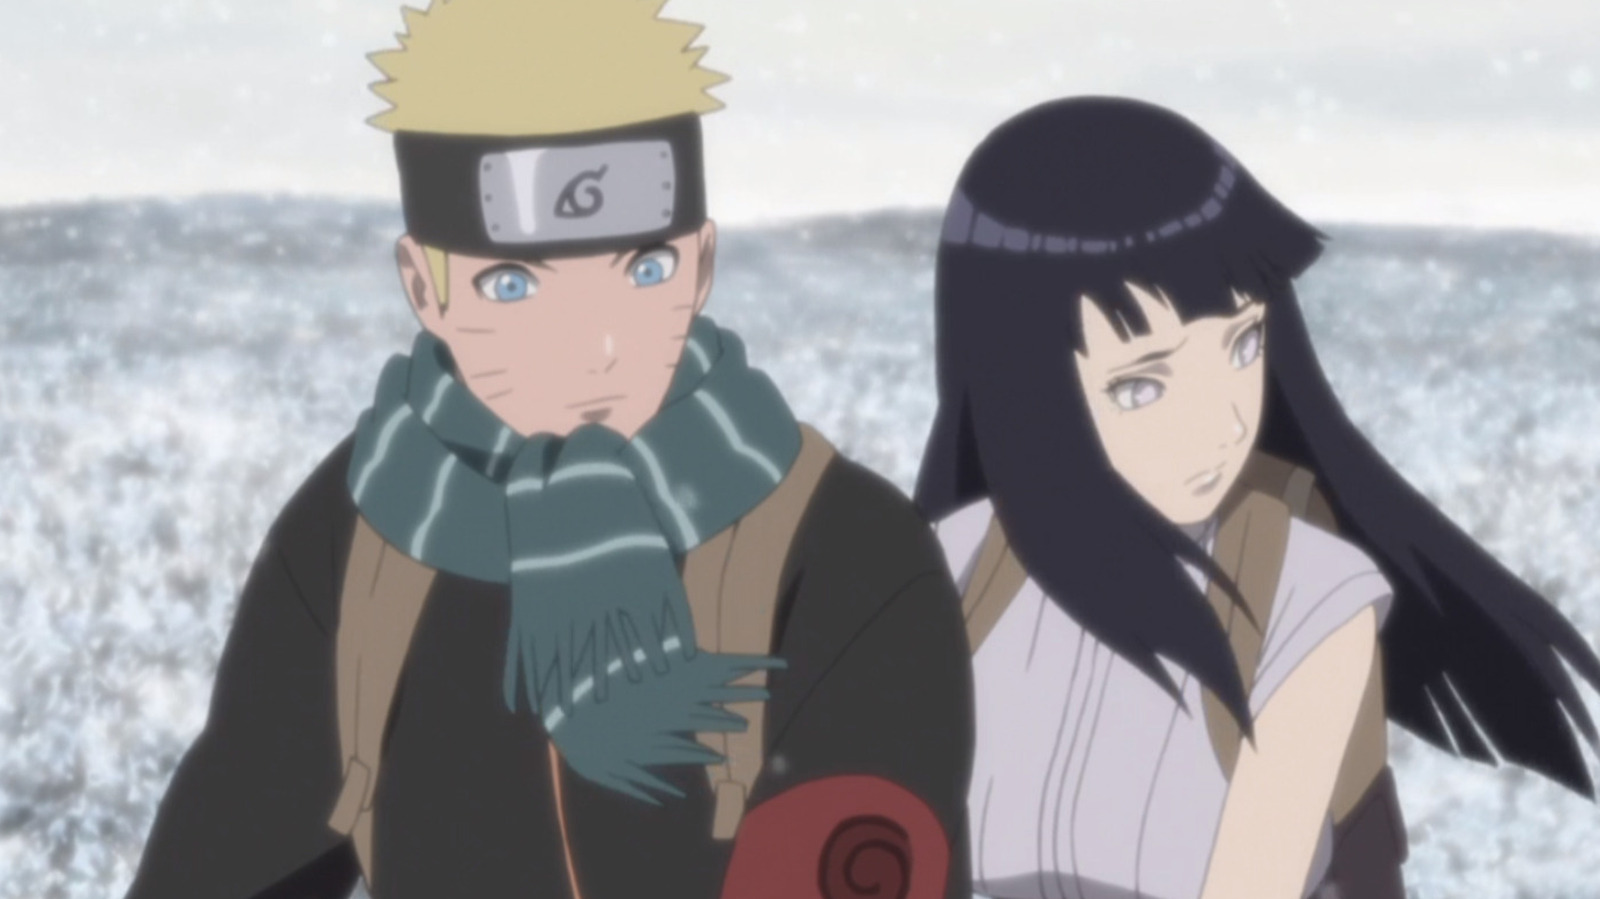 Naruto Creator Reveals His Thoughts On Its Controversial Love Triangle